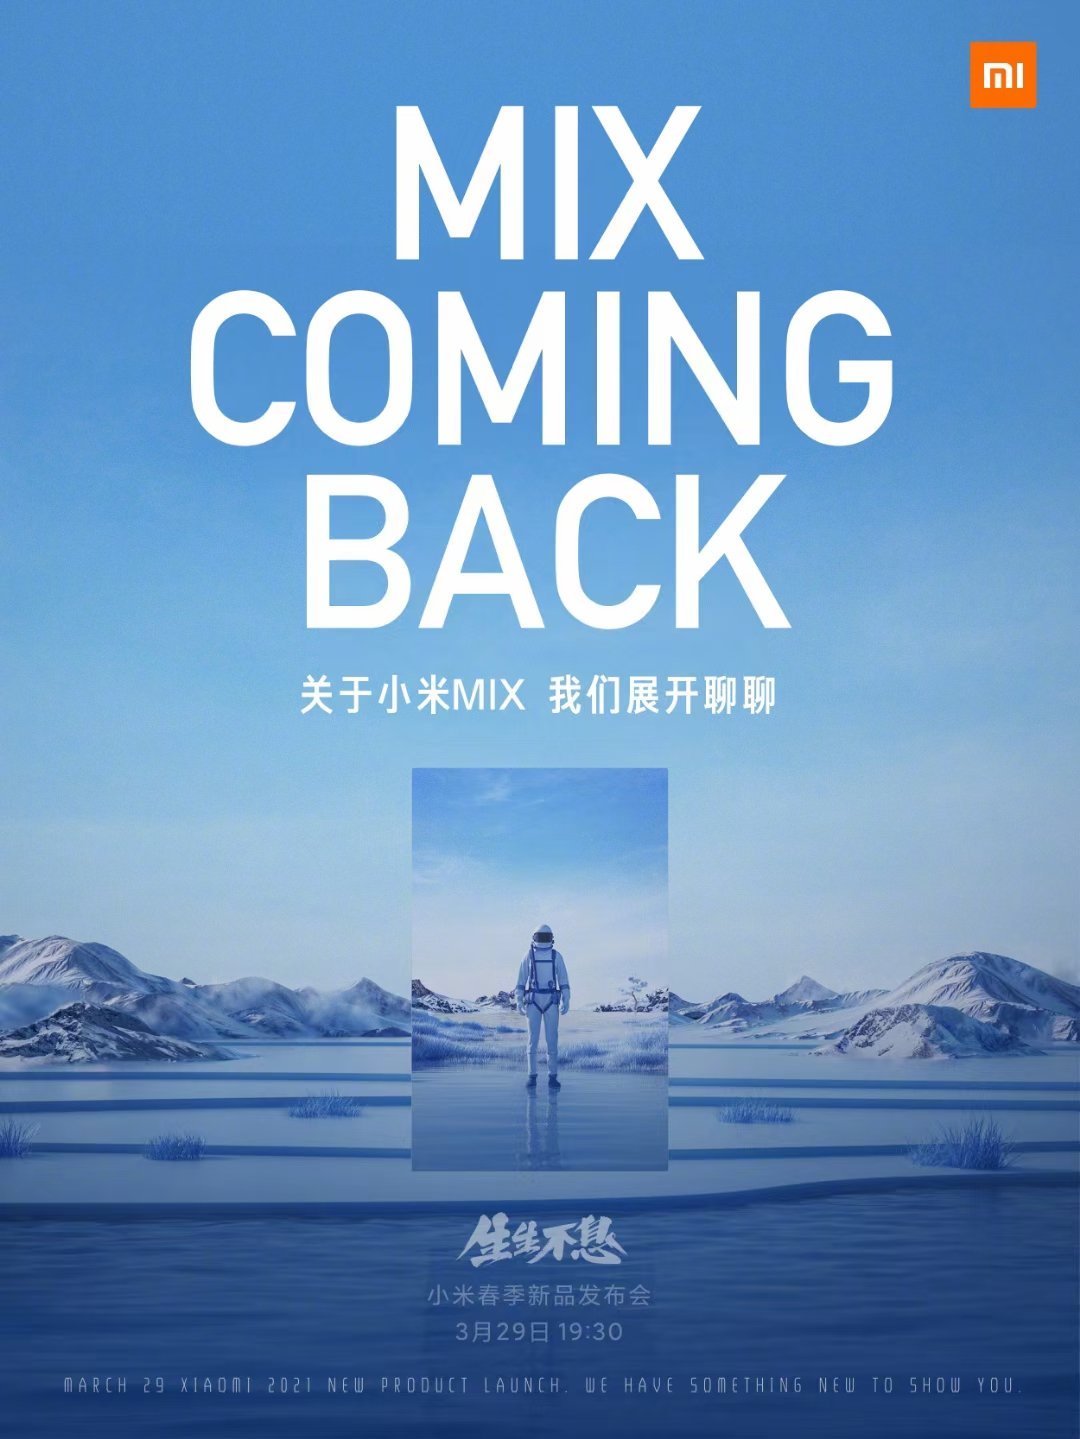 Xiaomi Mi MIX series smartphone confirmed to launch on March 29